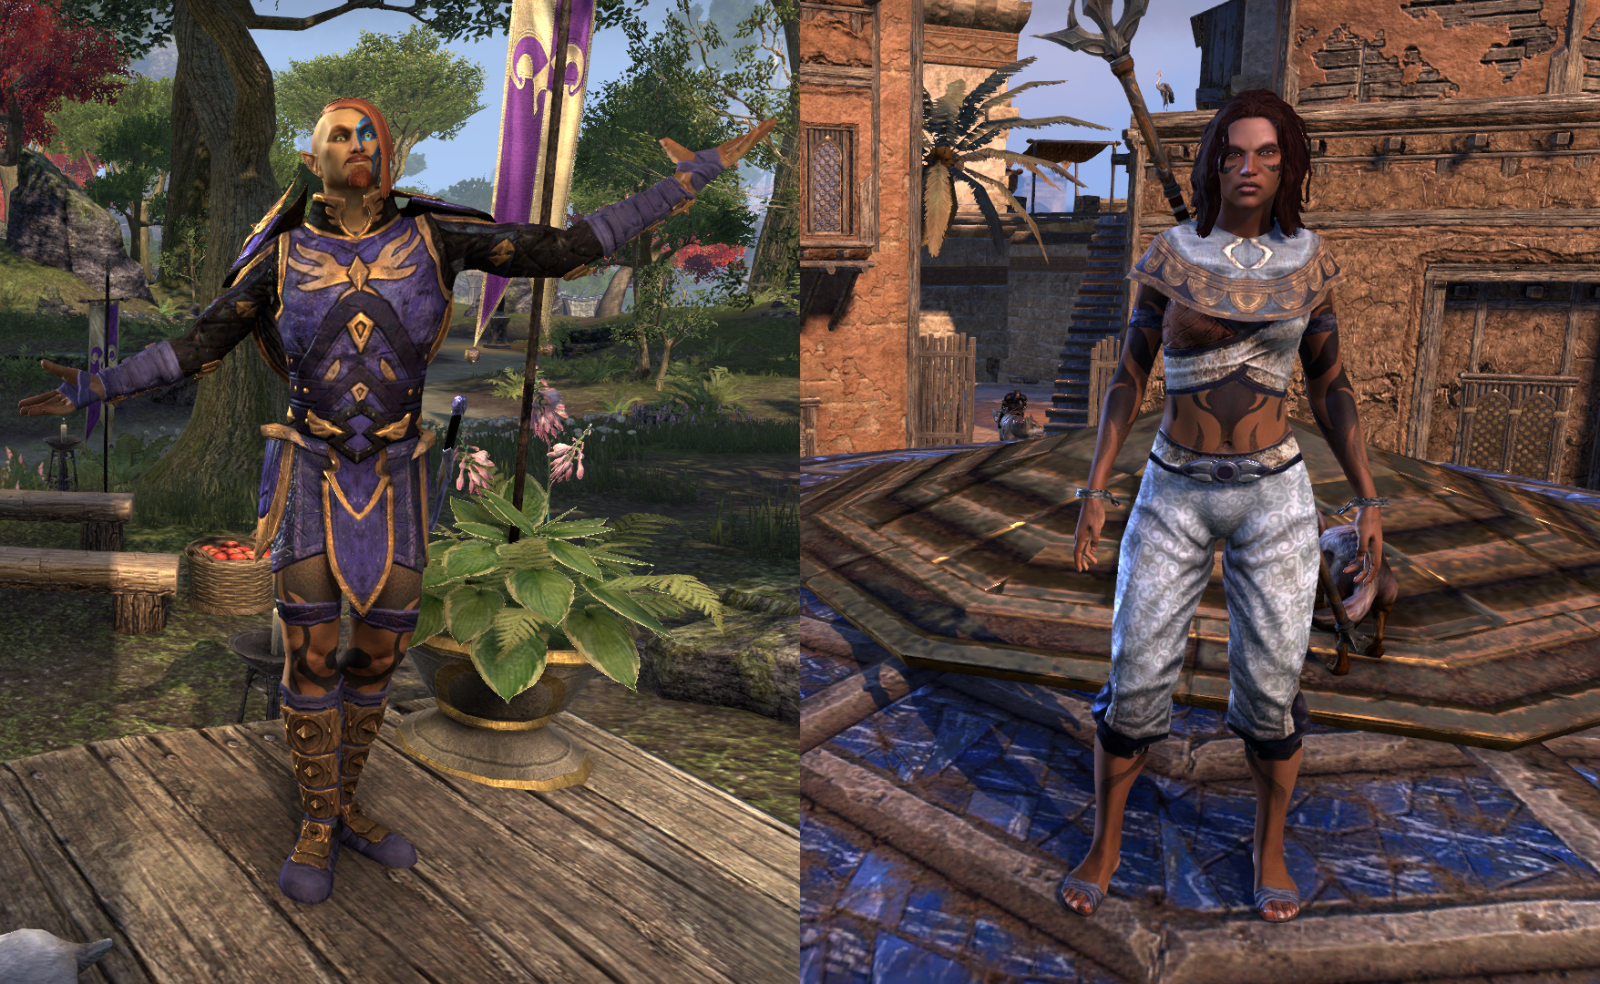 More ESO Outfits